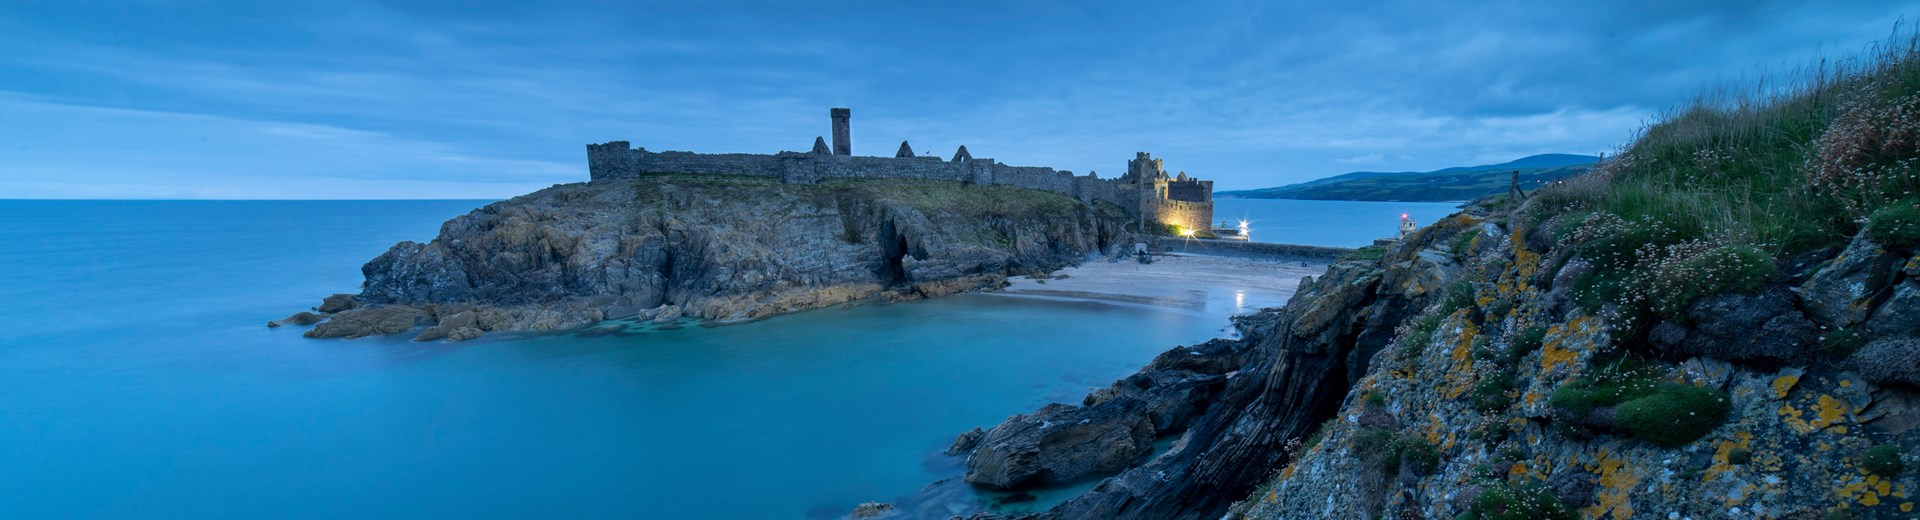 Peel castle and coastline at night time. The Castle is very old and in ruins. 